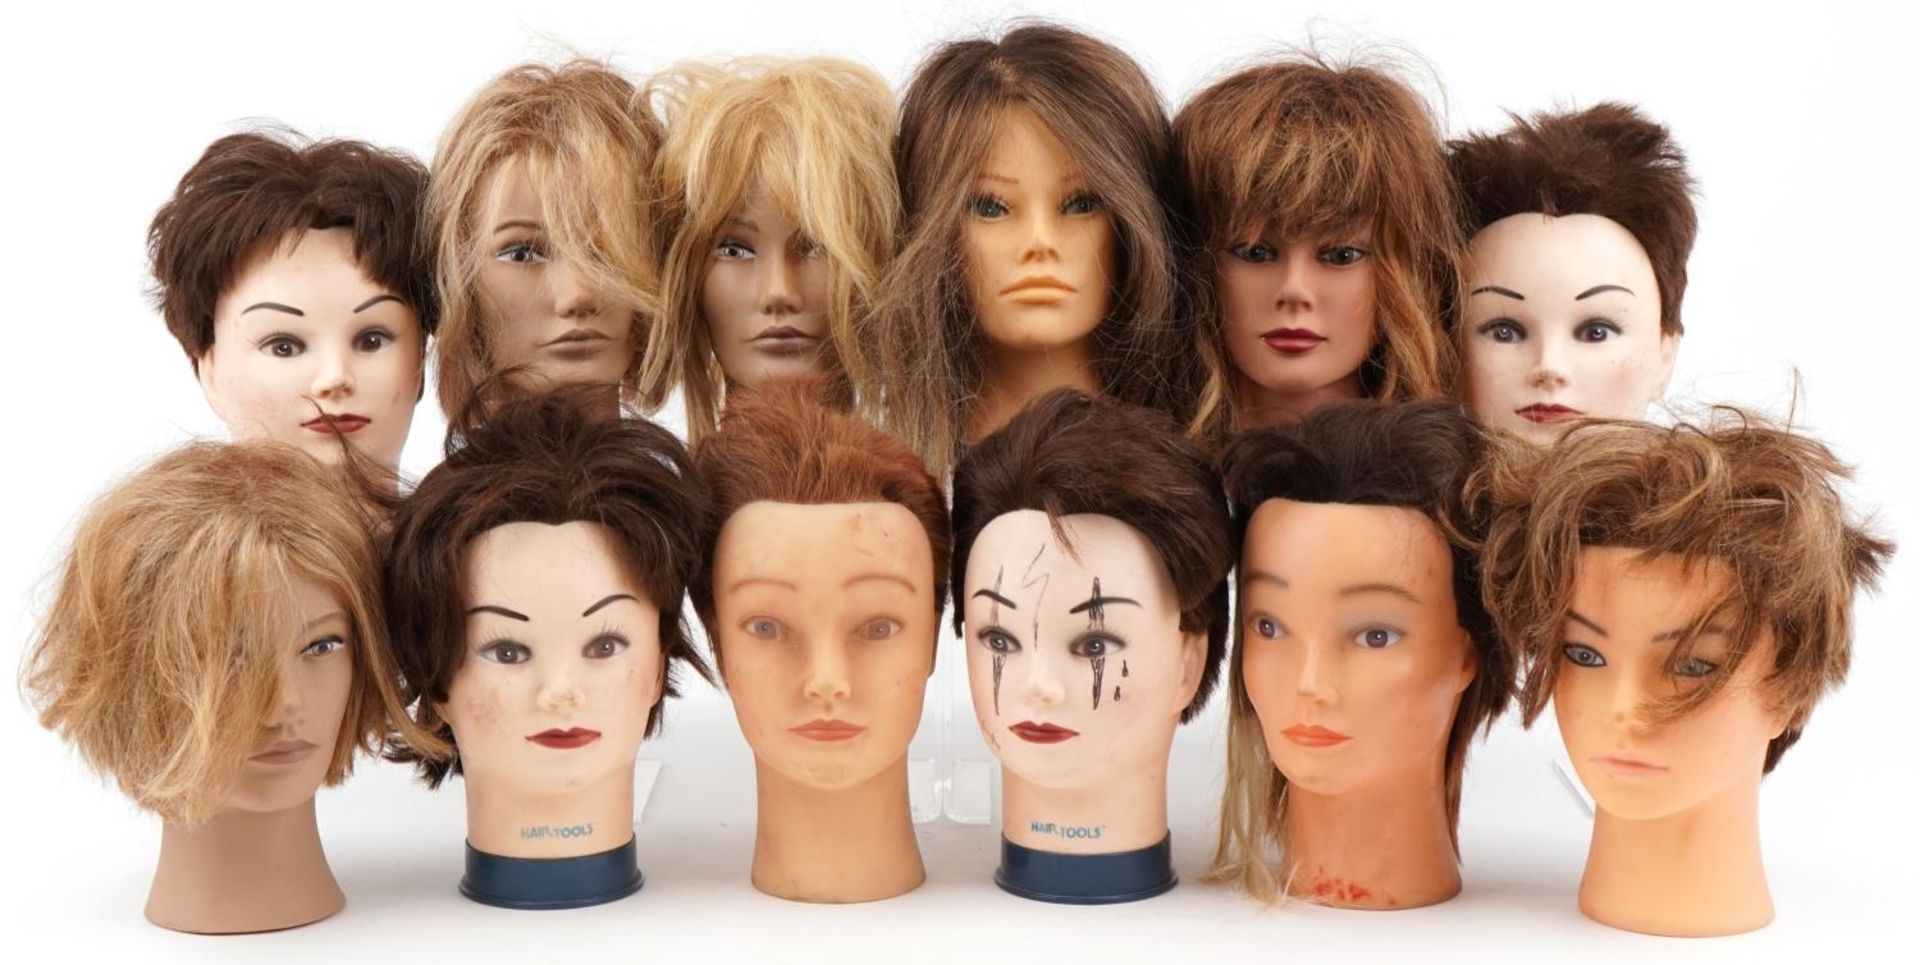 Collection of hairdresser's training mannequin heads including L'Image and hair tools